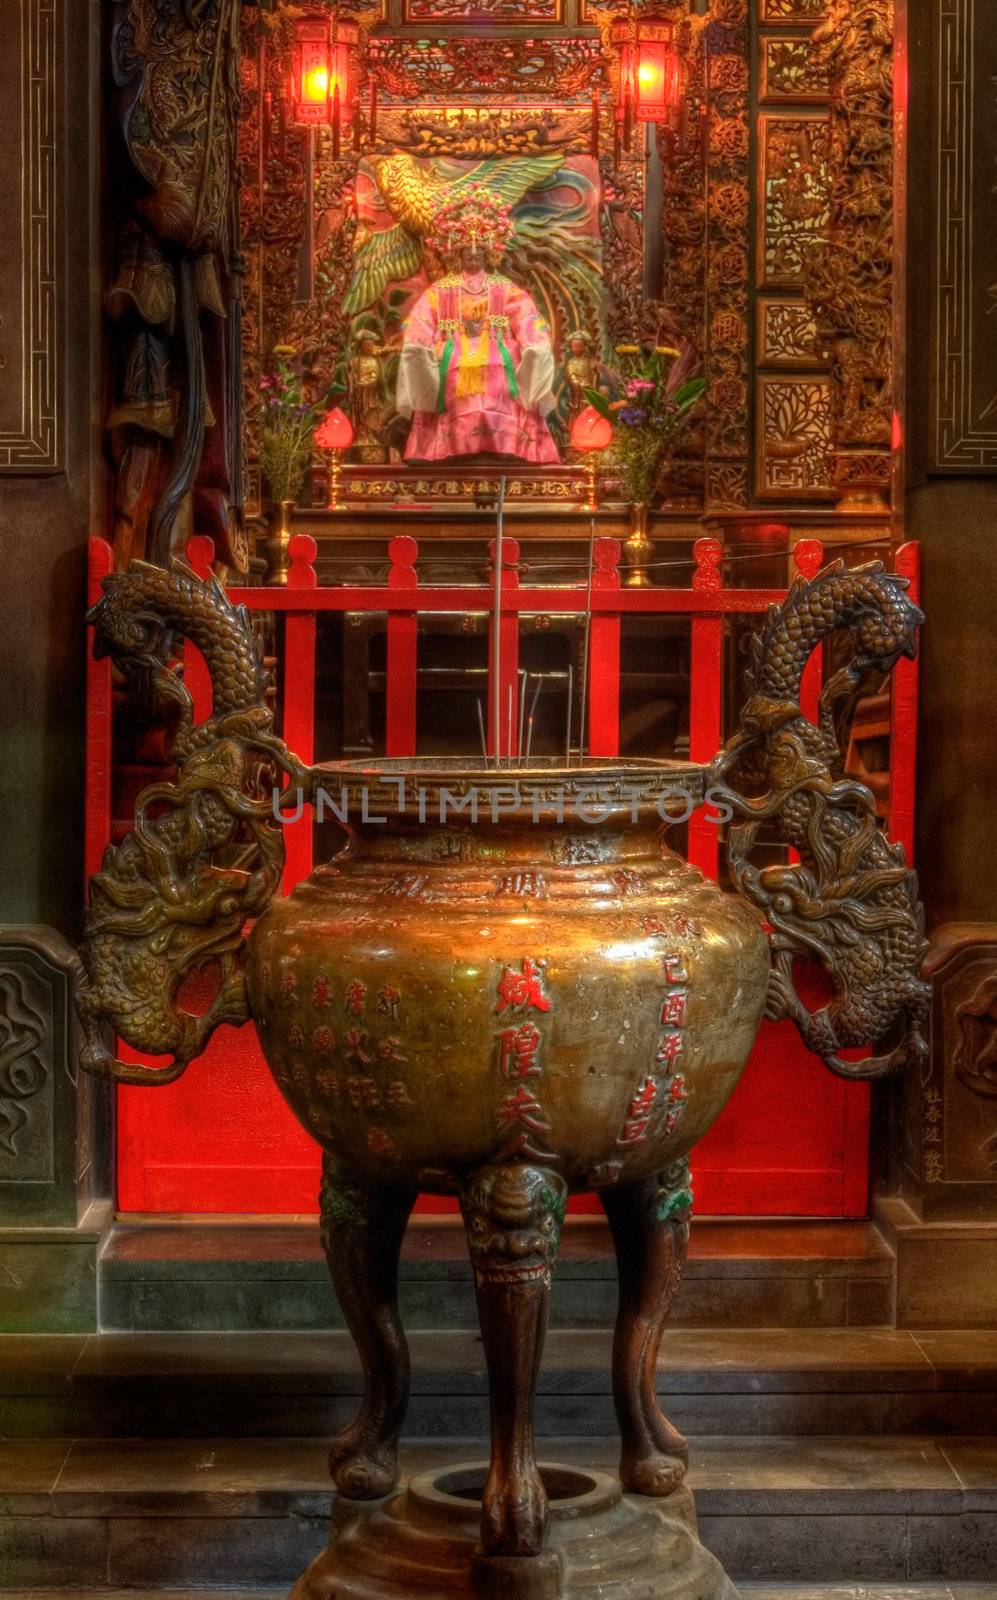 It is an chinese incense burner and god behind.